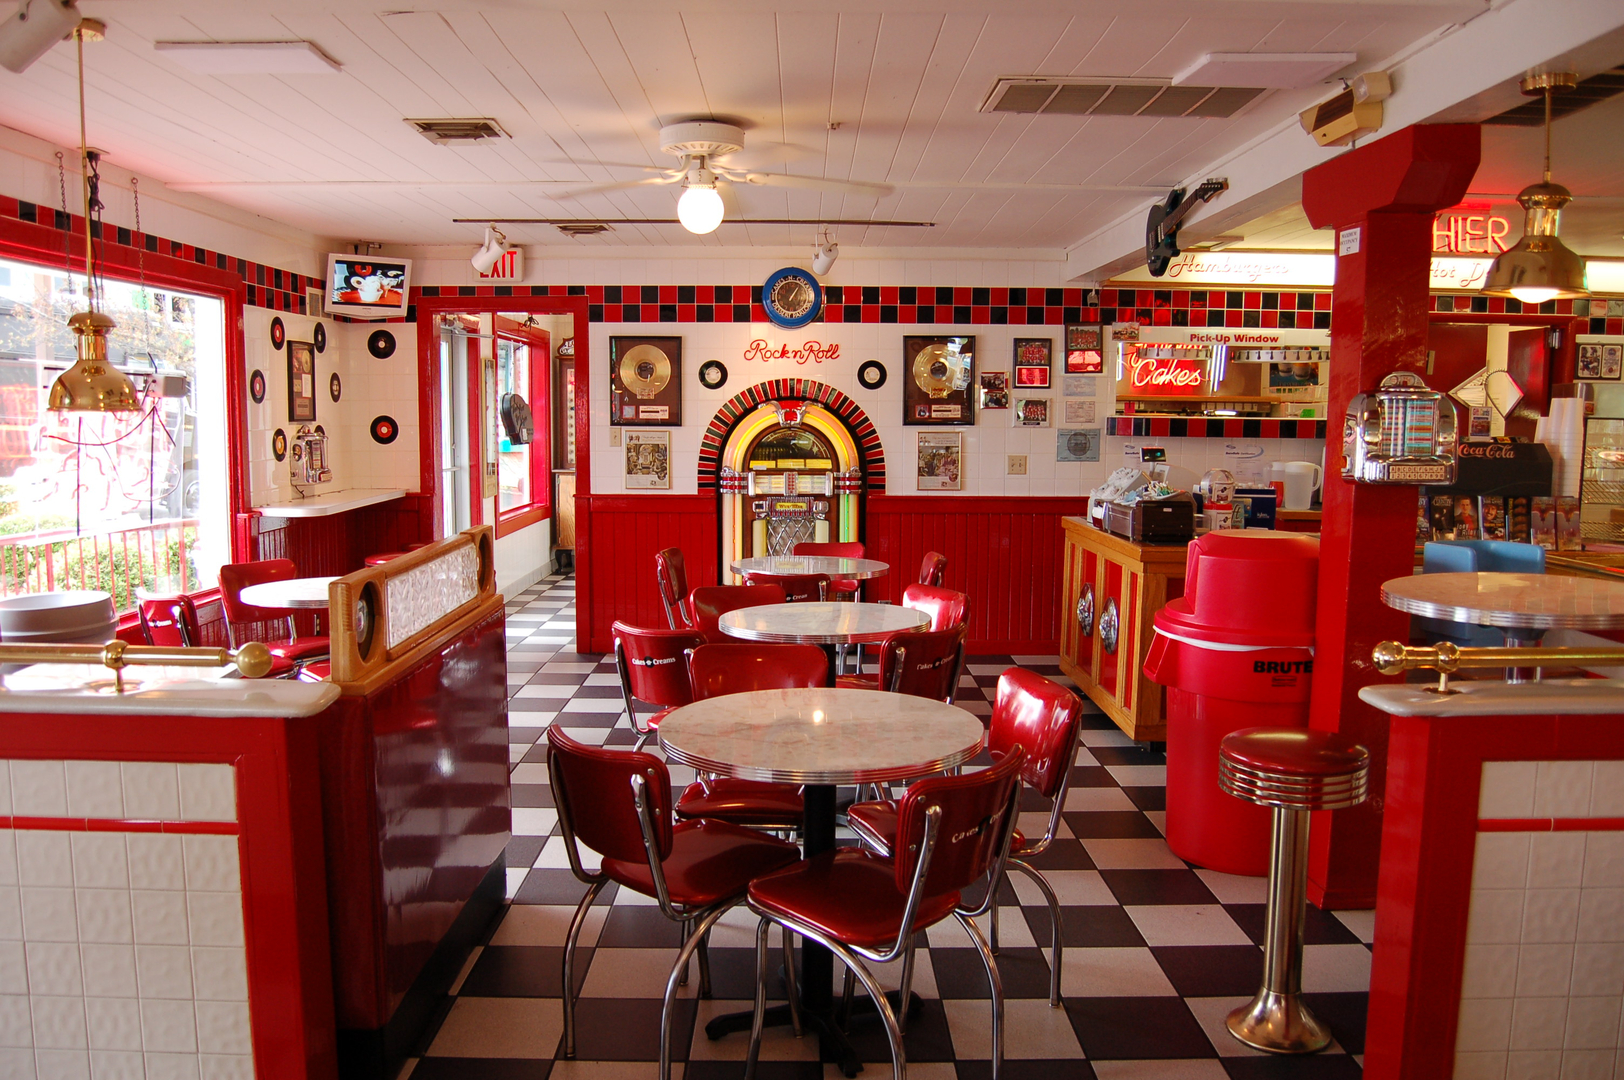 Wallpaper Full HD man made, room, chair, jukebox, red, retro, style, table